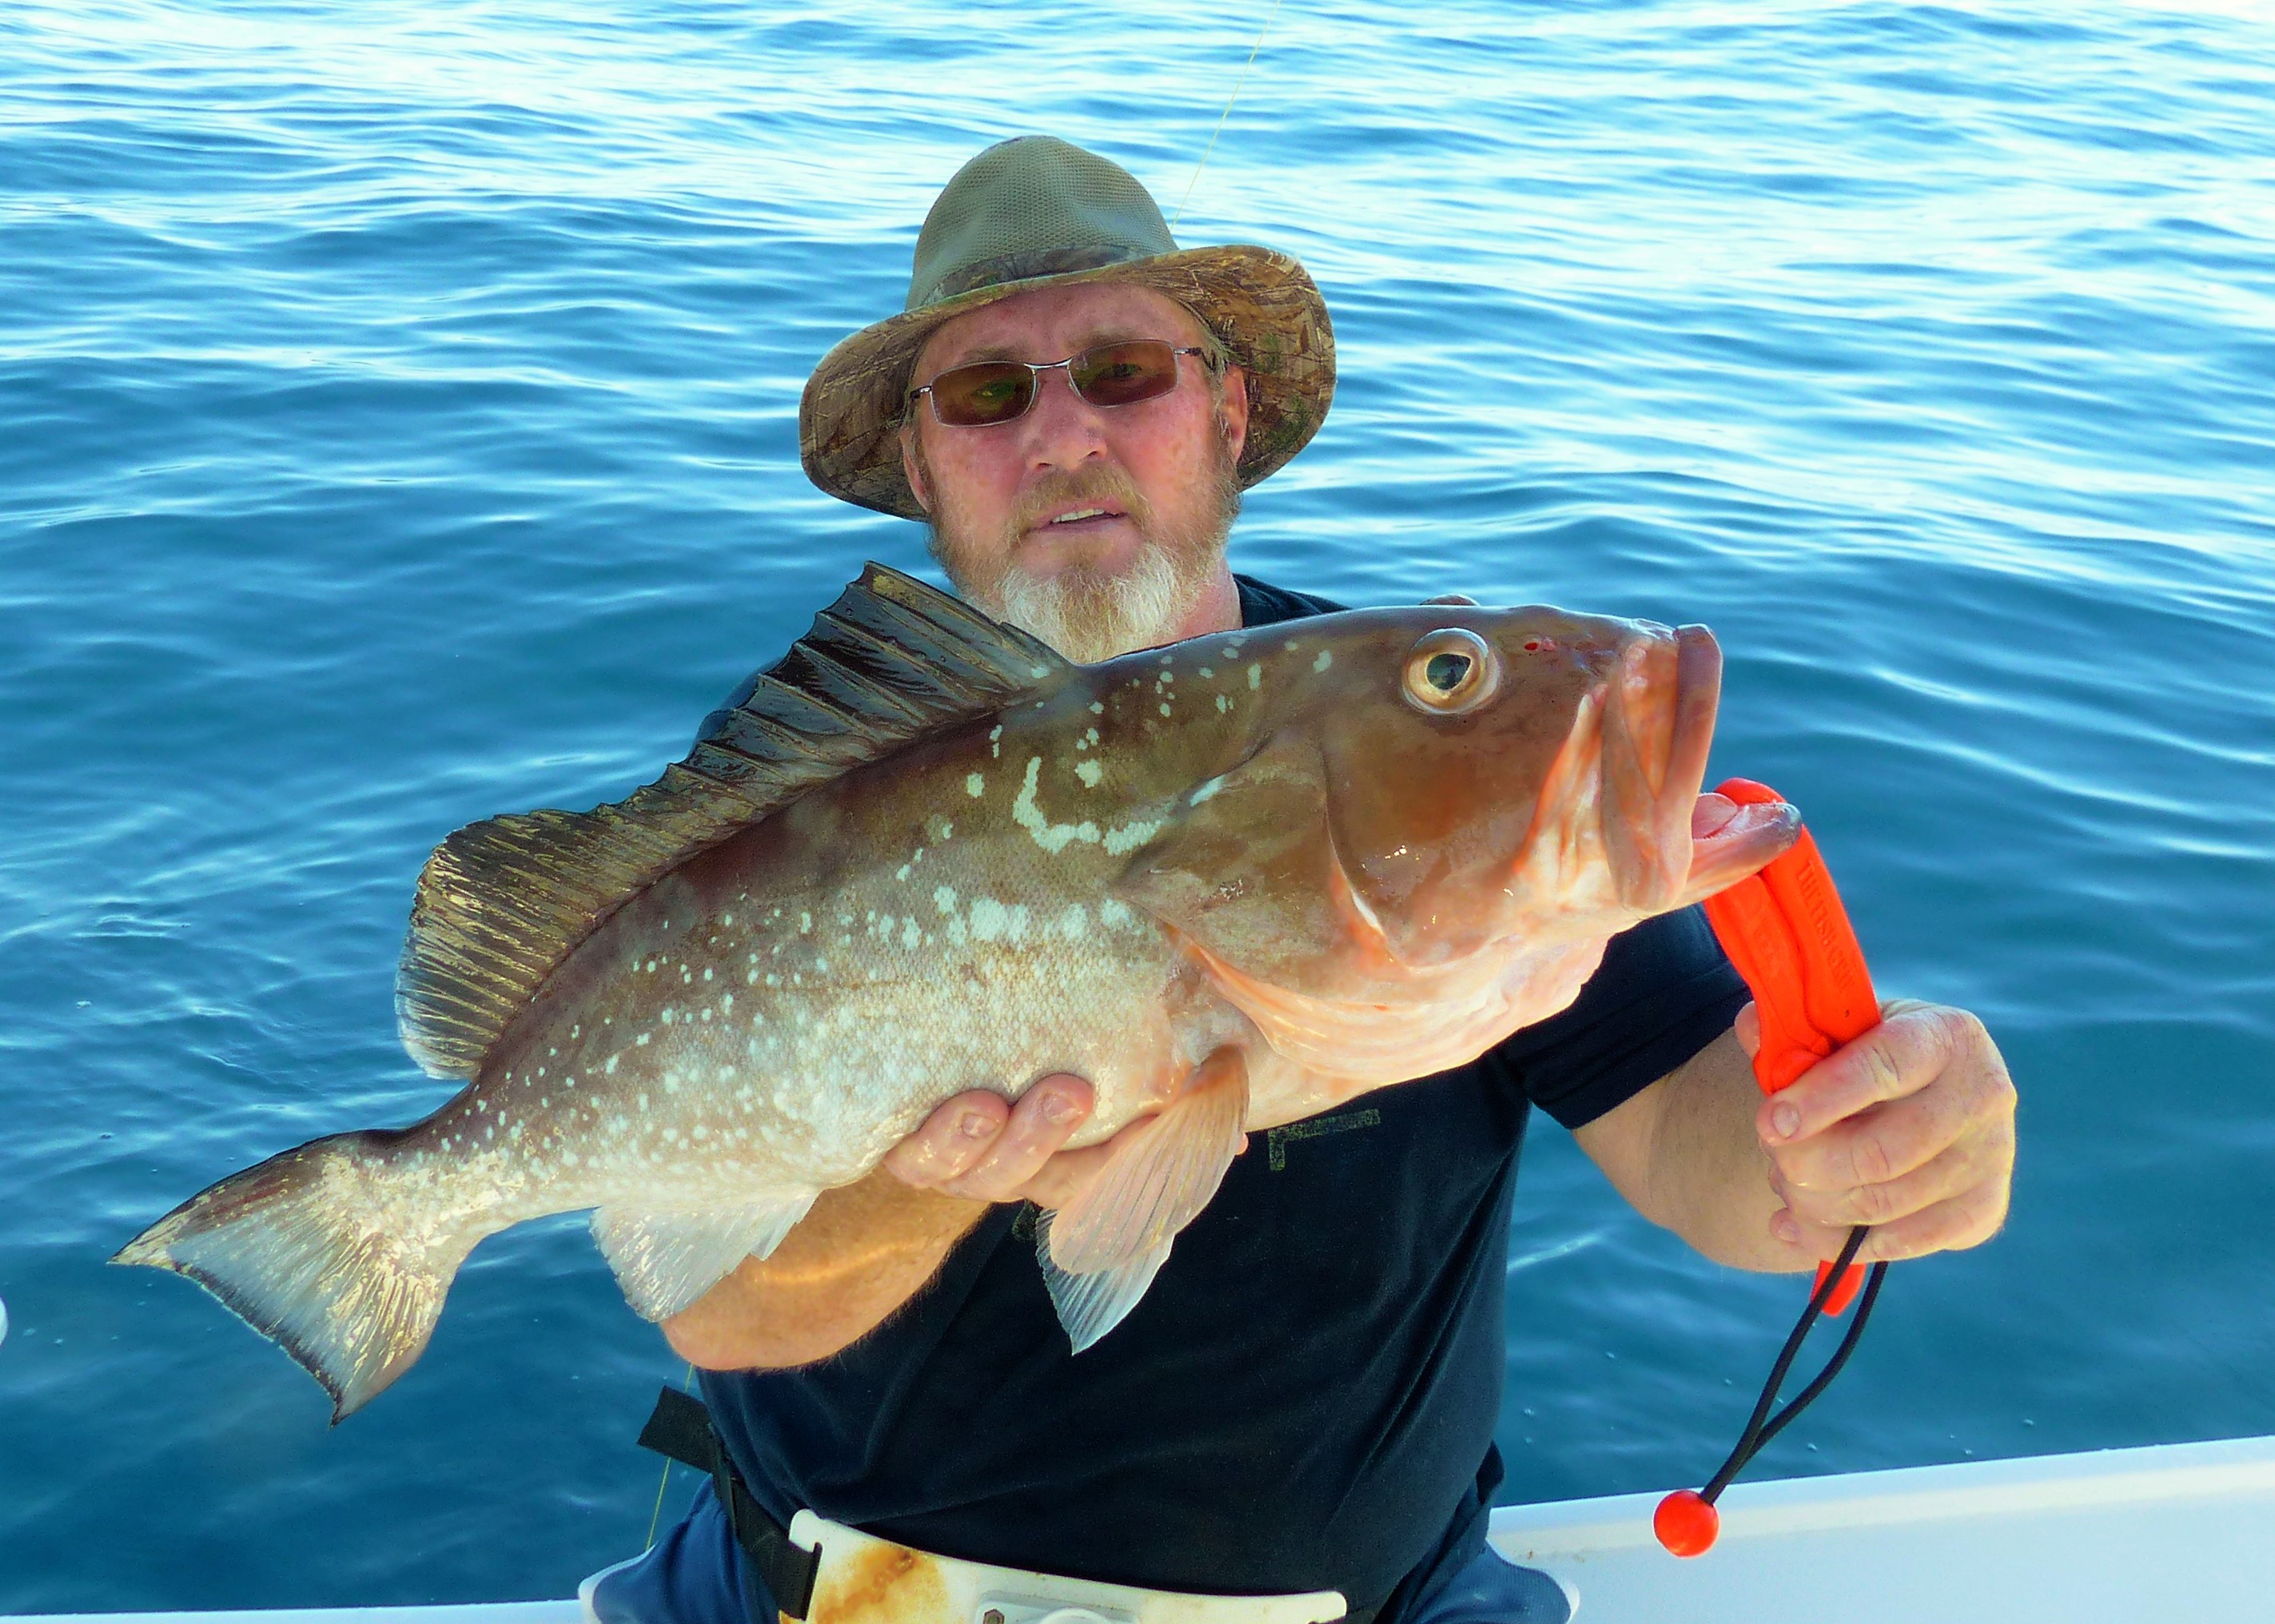 Shipwreck Fishing in Southwest Florida - Red Grouper and Snapper Fun